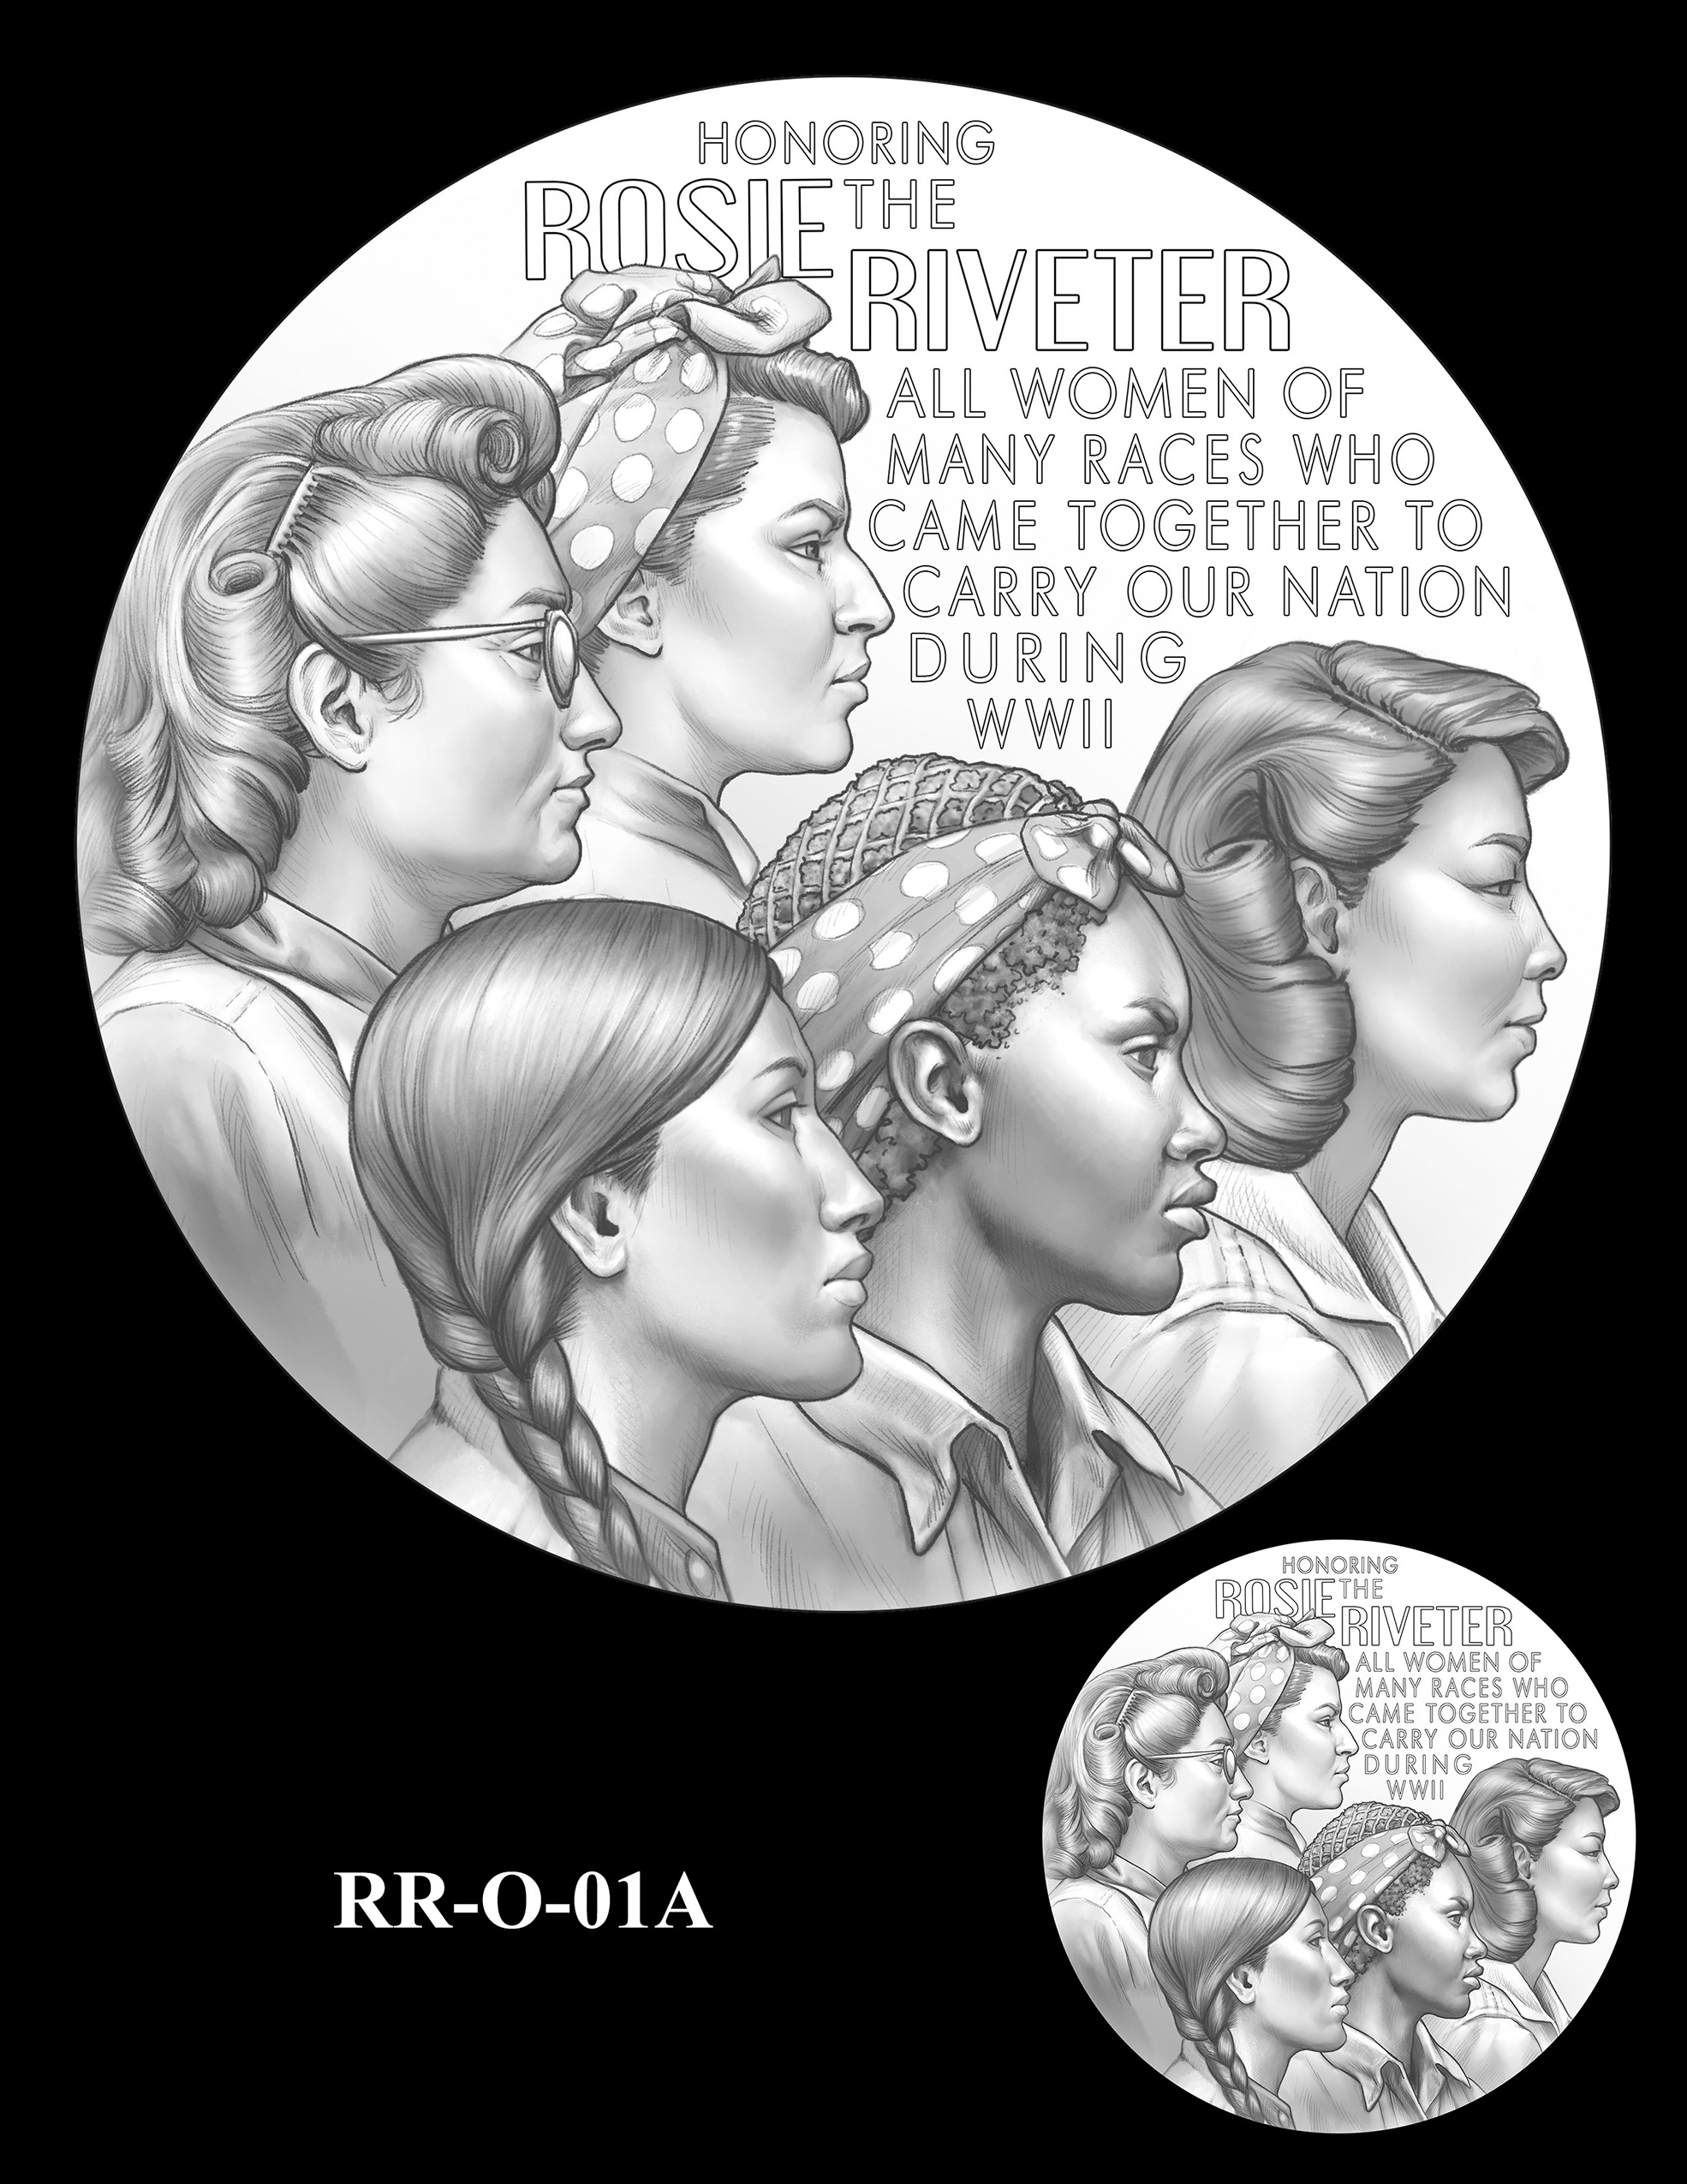 RR-O-01A -- Rosie the Riveter Congressional Gold Medal